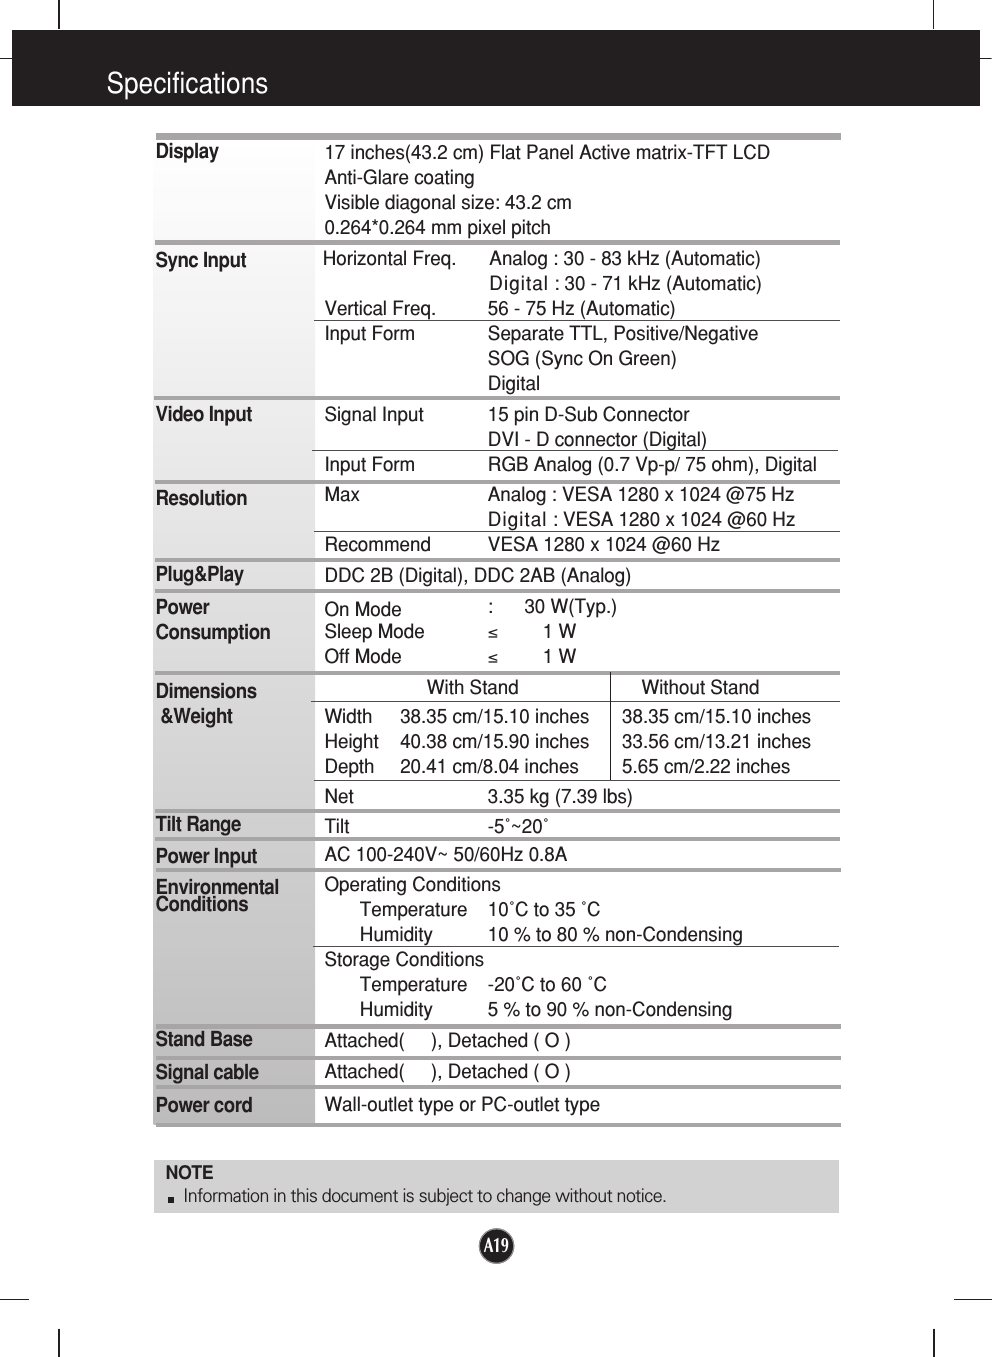 A19A19A19Specifications NOTEInformation in this document is subject to change without notice.DisplaySync InputVideo InputResolutionPlug&amp;PlayPowerConsumptionDimensions&amp;WeightTilt RangePower InputEnvironmentalConditionsStand BaseSignal cablePower cord 17 inches(43.2 cm) Flat Panel Active matrix-TFT LCD Anti-Glare coatingVisible diagonal size: 43.2 cm0.264*0.264 mm pixel pitchHorizontal Freq. Analog : 30 - 83 kHz (Automatic)Digital : 30 - 71 kHz (Automatic)Vertical Freq. 56 - 75 Hz (Automatic)Input Form Separate TTL, Positive/NegativeSOG (Sync On Green) DigitalSignal Input 15 pin D-Sub ConnectorDVI - D connector (Digital)Input Form RGB Analog (0.7 Vp-p/ 75 ohm), DigitalMax Analog : VESA 1280 x 1024 @75 HzDigital : VESA 1280 x 1024 @60 HzRecommend VESA 1280 x 1024 @60 HzDDC 2B (Digital), DDC 2AB (Analog)On Mode : 30 W(Typ.)Sleep Mode ≤1 WOff Mode ≤1 WWith Stand Without StandWidth 38.35 cm/15.10 inches 38.35 cm/15.10 inchesHeight 40.38 cm/15.90 inches 33.56 cm/13.21 inchesDepth 20.41 cm/8.04 inches 5.65 cm/2.22 inchesNet 3.35 kg (7.39 lbs)Tilt -5˚~20˚AC 100-240V~ 50/60Hz 0.8A Operating ConditionsTemperature 10˚C to 35 ˚CHumidity 10 % to 80 % non-CondensingStorage ConditionsTemperature -20˚C to 60 ˚CHumidity 5 % to 90 % non-CondensingAttached(     ), Detached ( O )Attached(     ), Detached ( O )Wall-outlet type or PC-outlet type